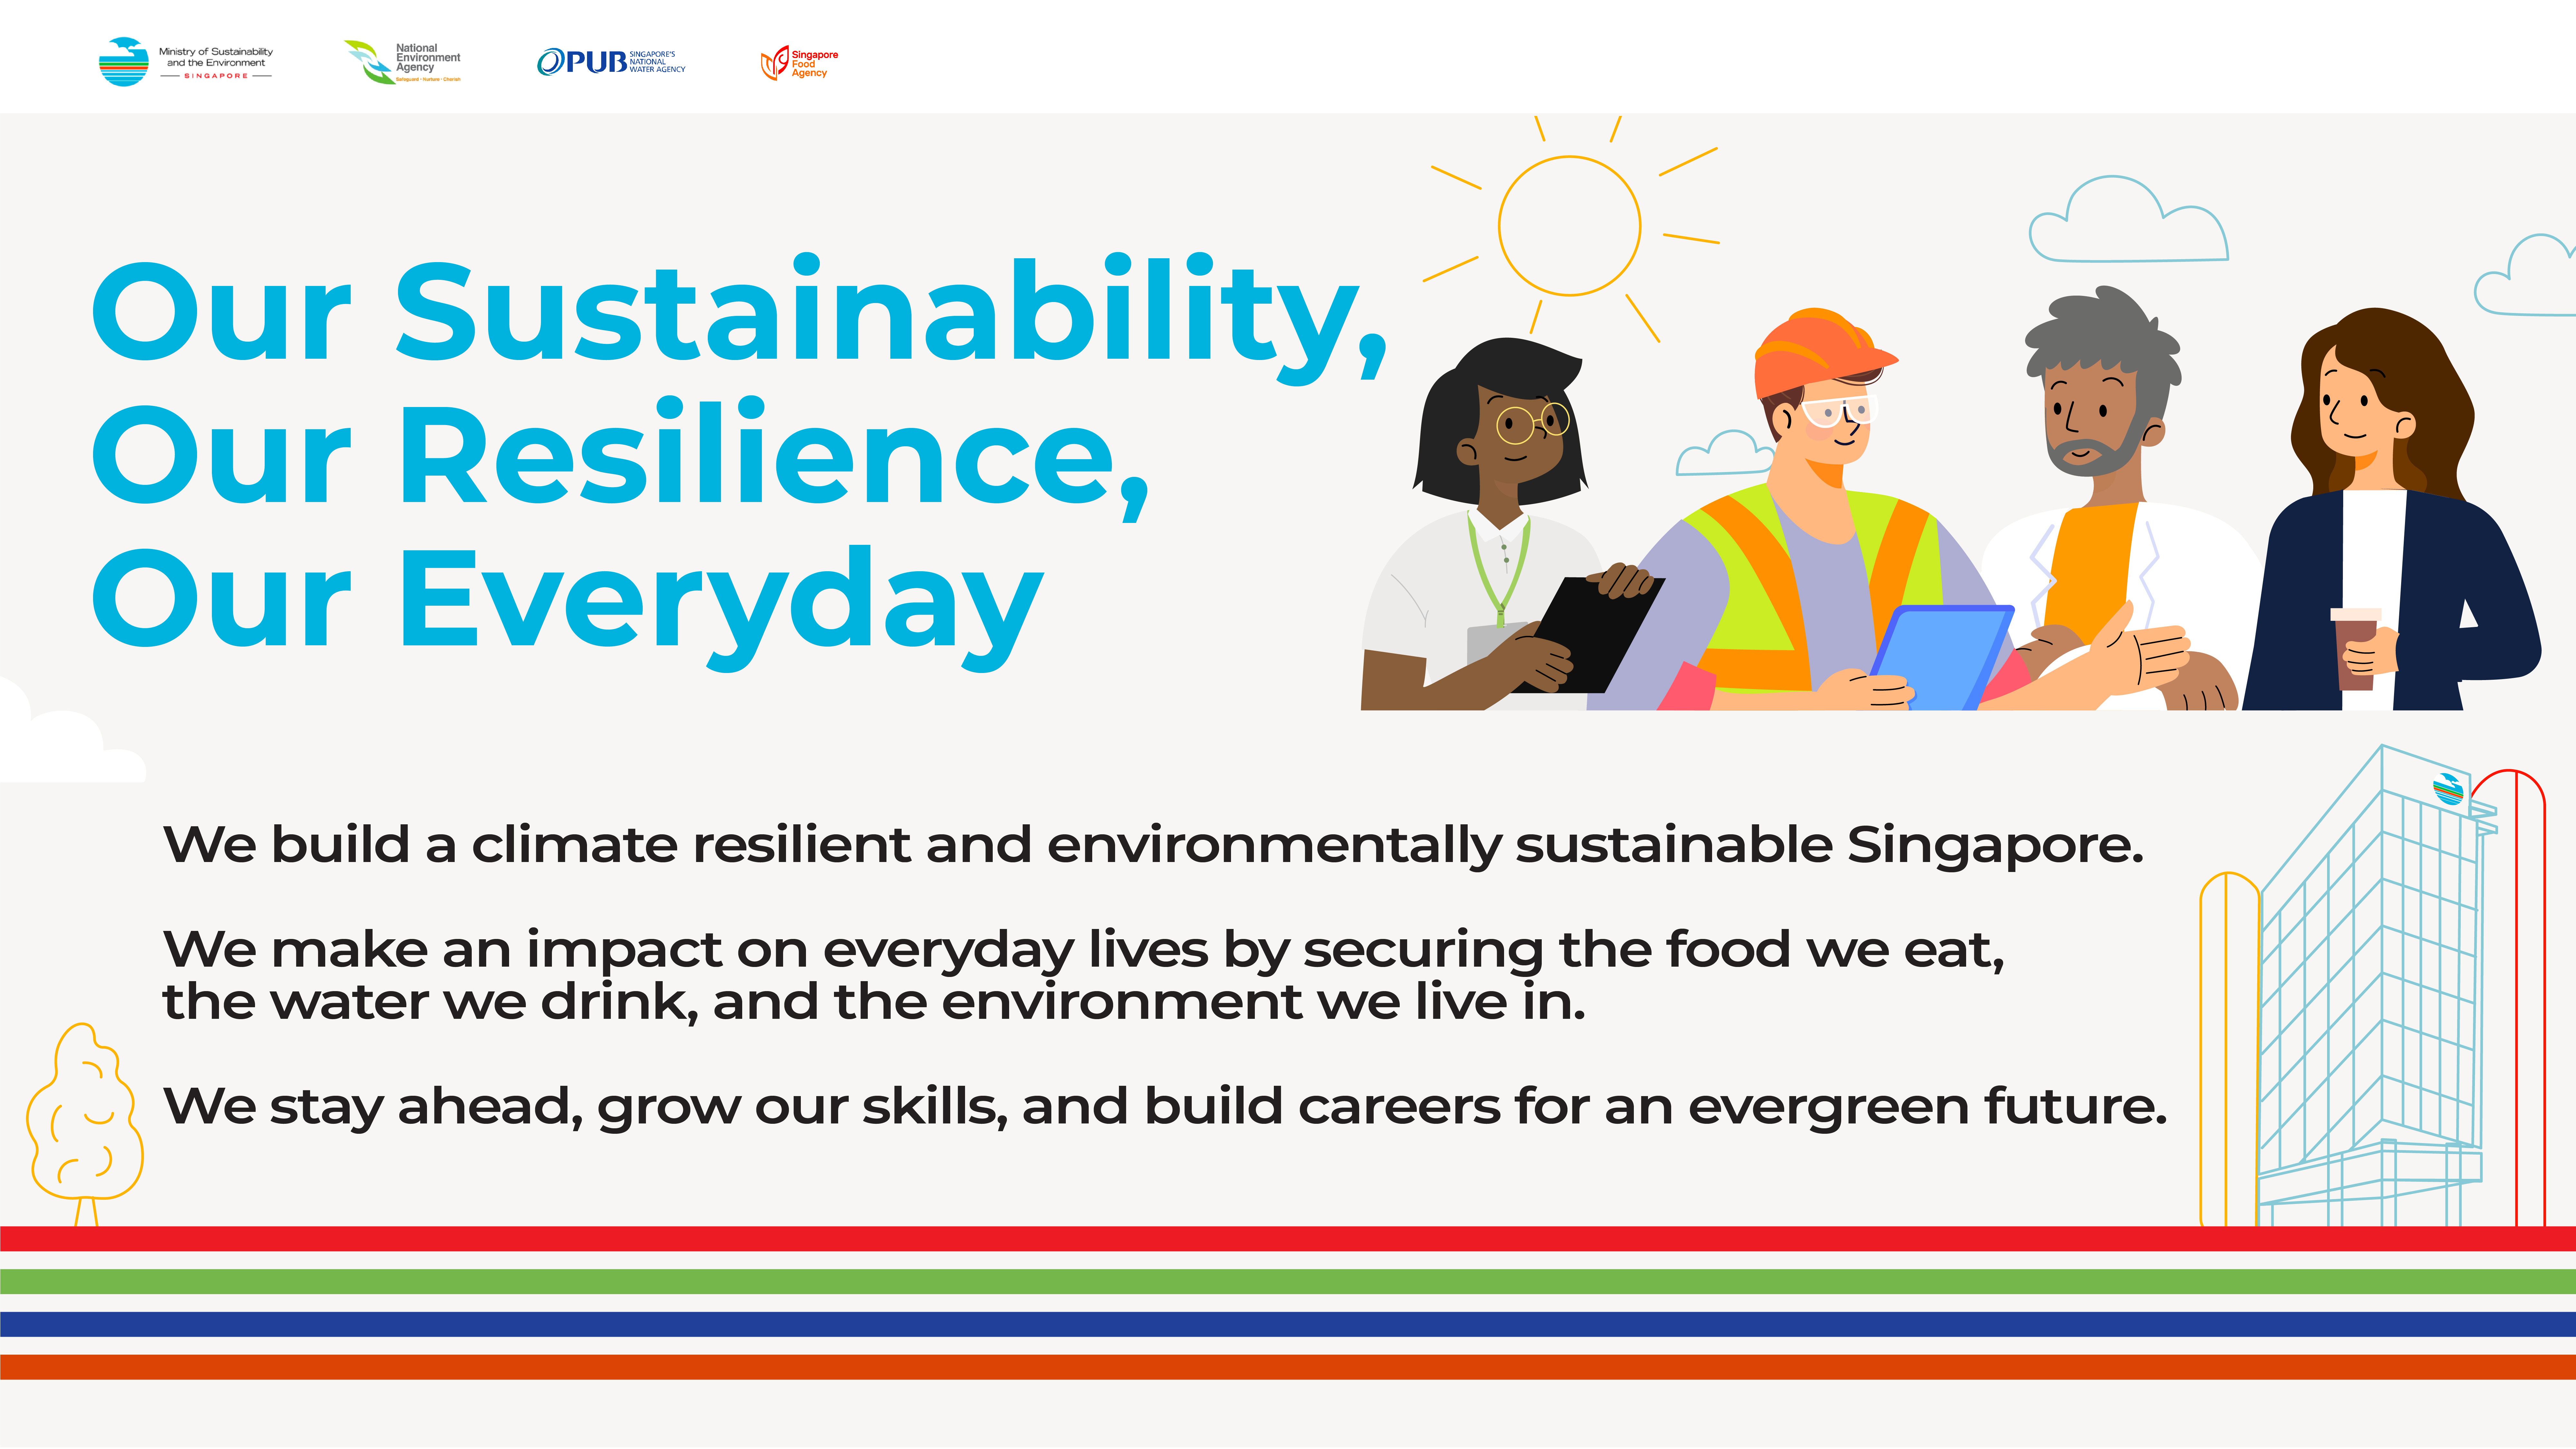 MSE Banner - Our Sustainability, Our Resilience, Our Everyday